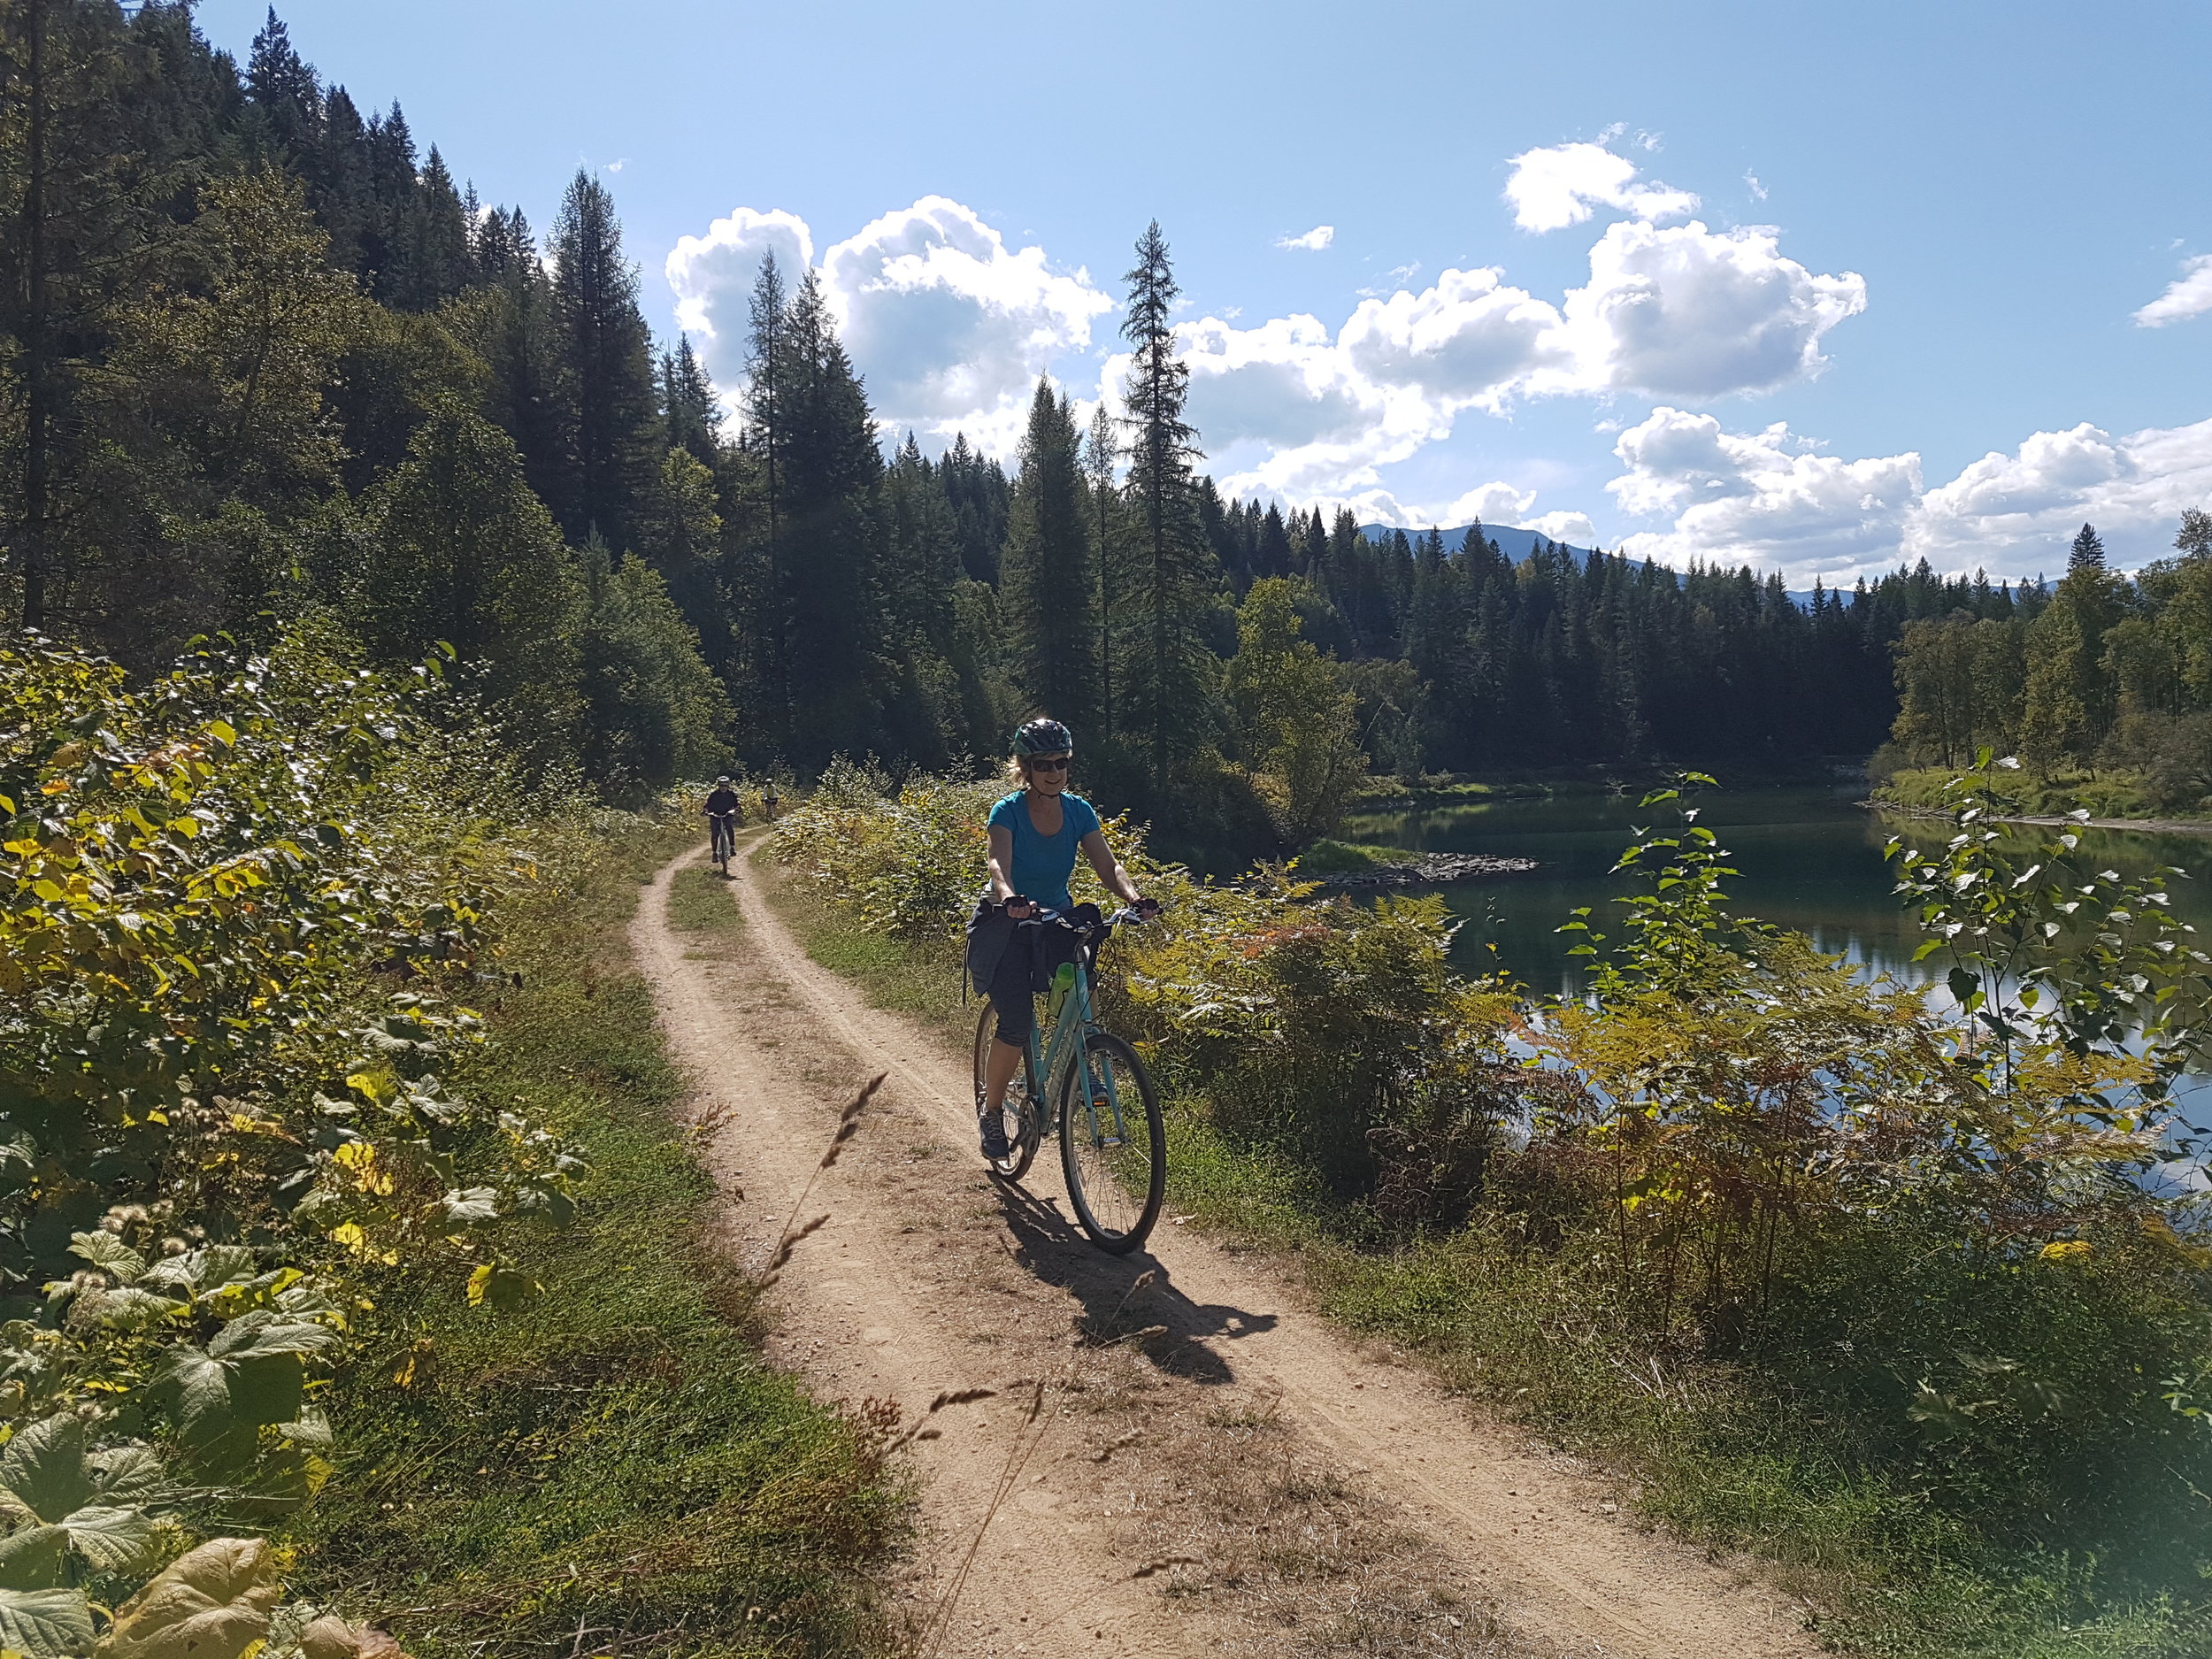 Riding along the Slocan Valley trail in Nelsn during our Mutliday tour